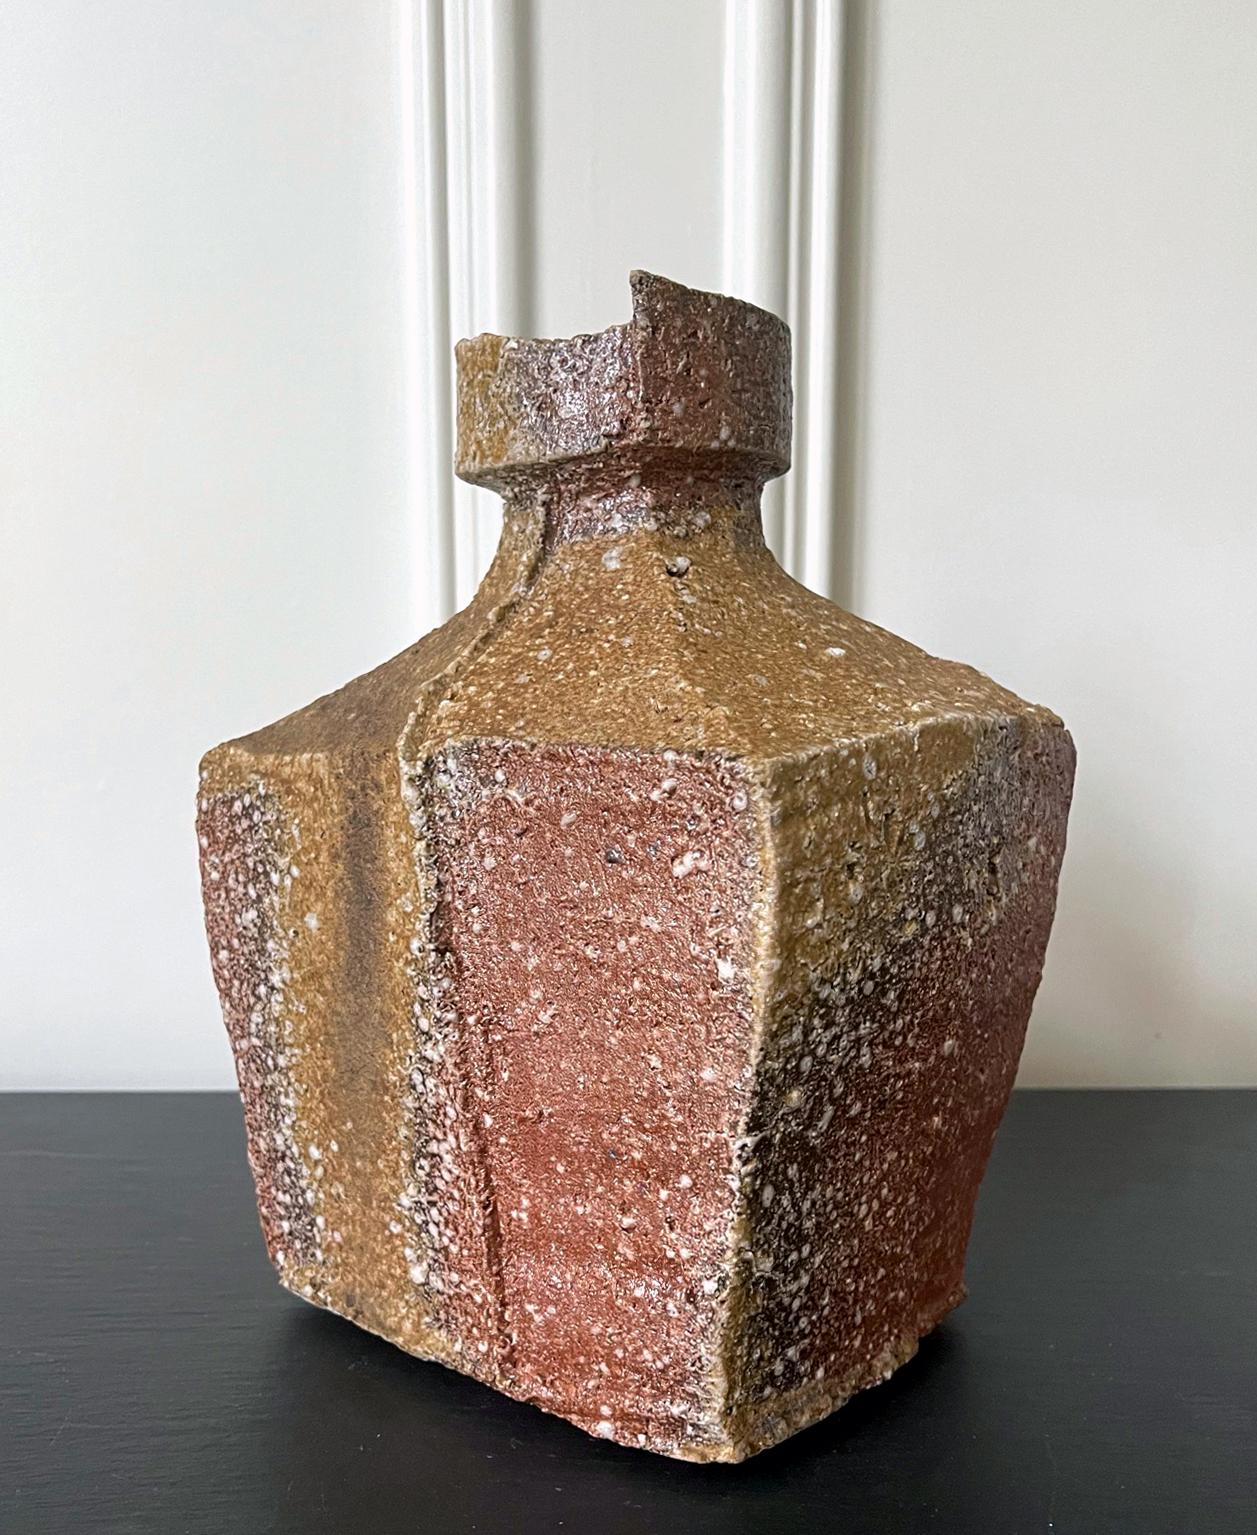 A modern ikebana vase in a rectangular form made in the tradition of Shigaraki ware by celebrated Japanese potter Kohyama Yasuhisa (1936-). Born in the town of Shigaraki, Yasuhisa was one of the first potters who revived the ancient techniques by